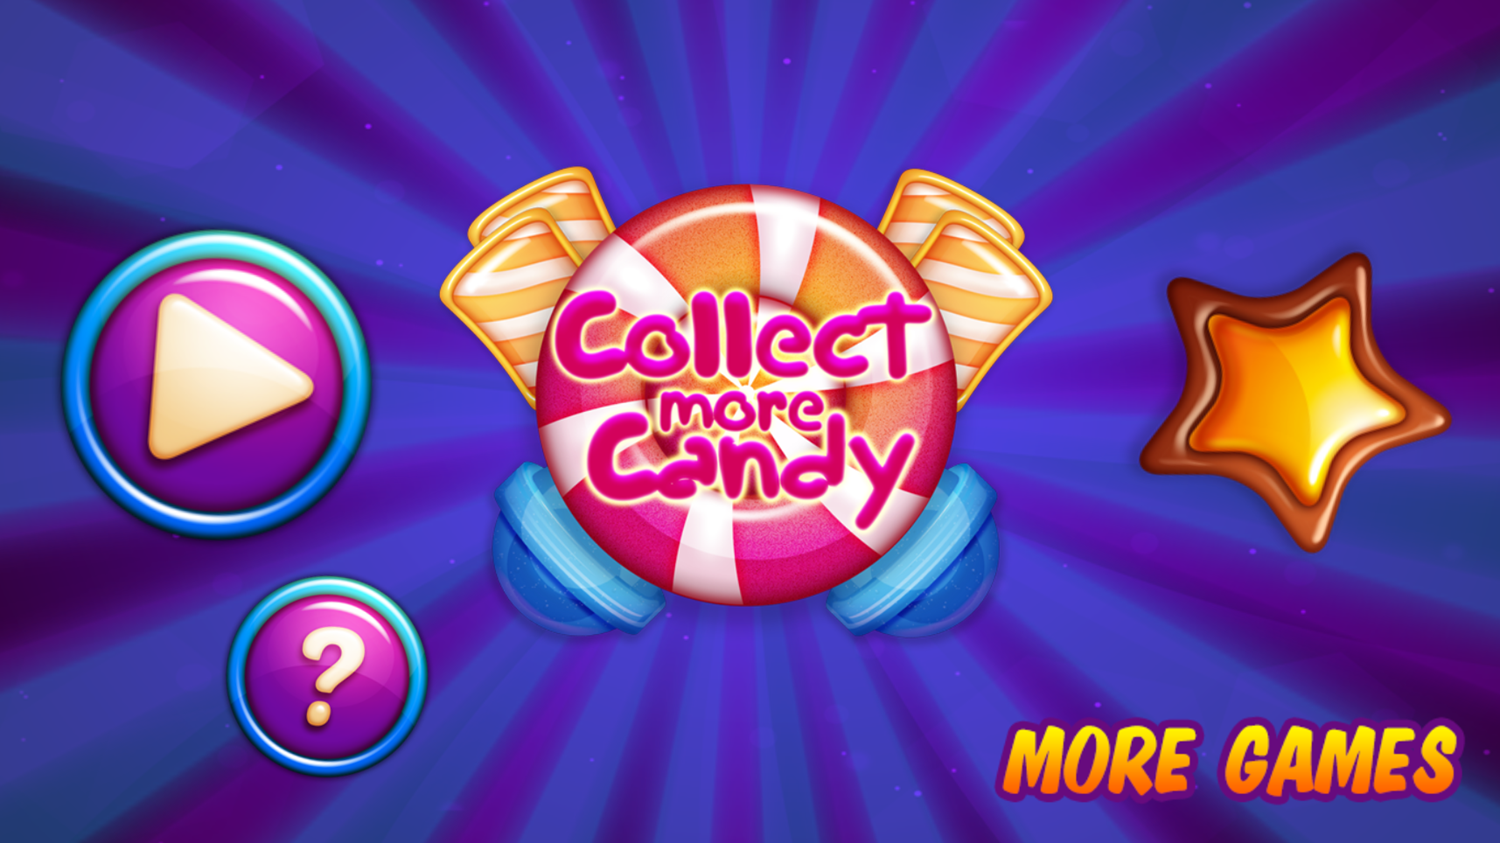 Collect More Candy Game Welcome Screen Screenshot.